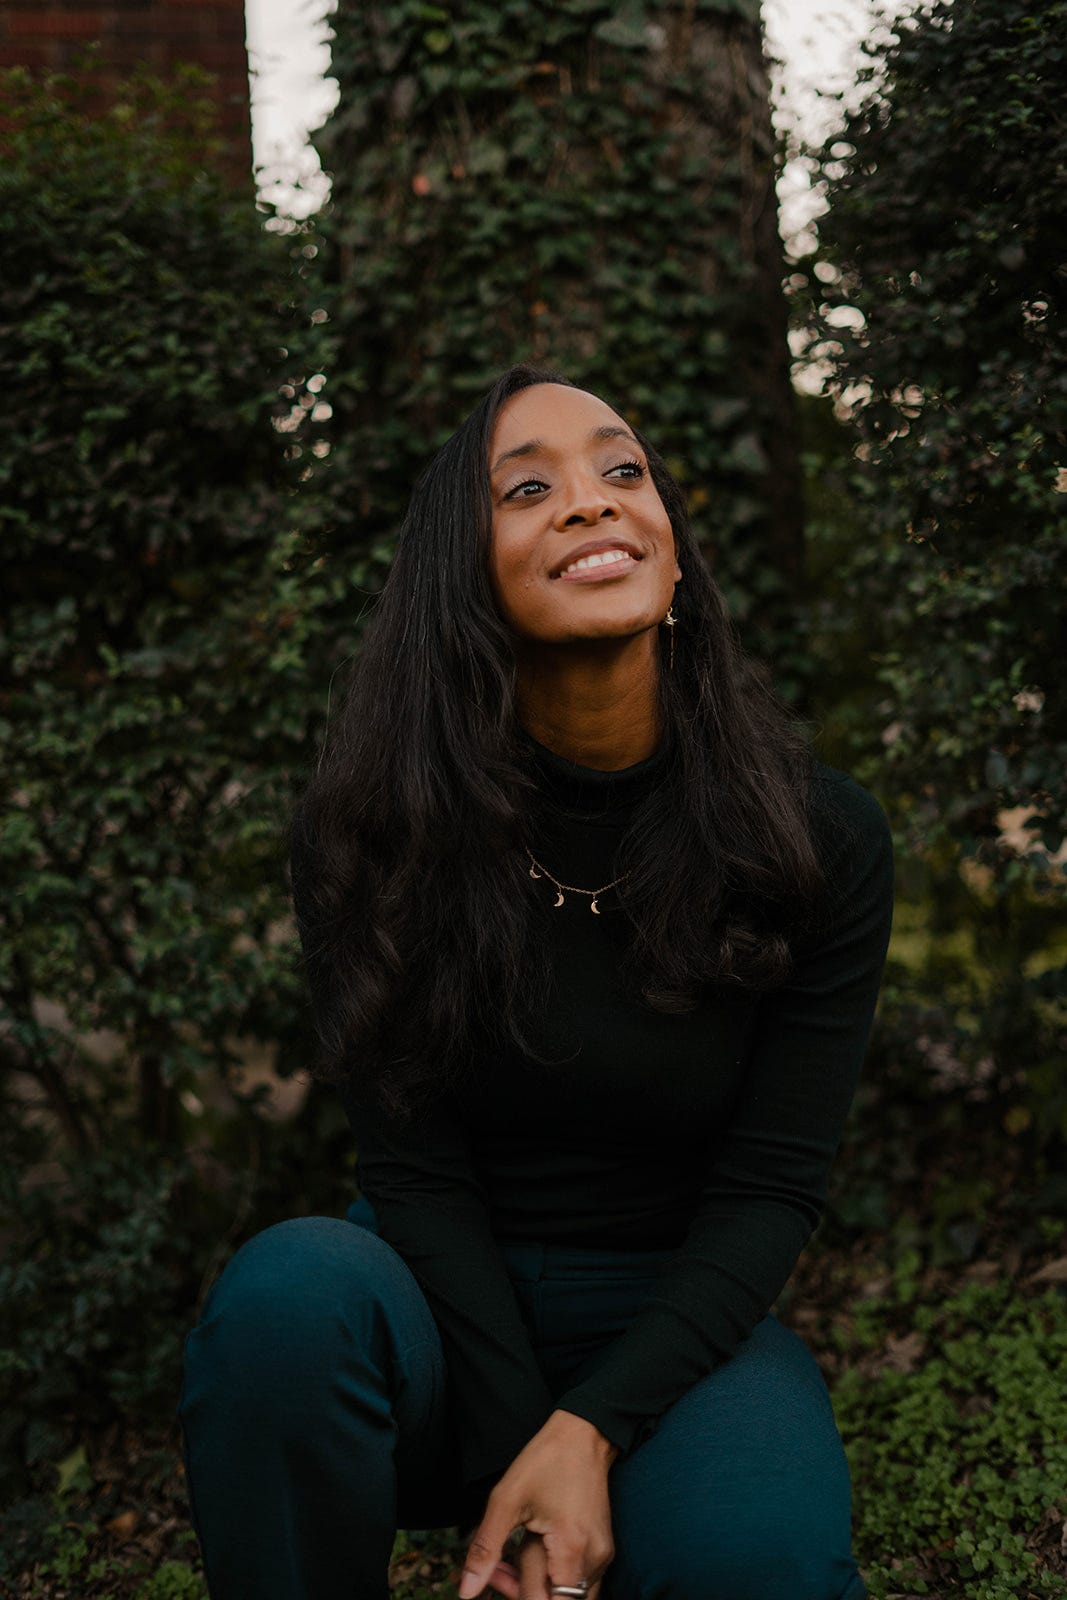 mage description: Black woman kneels above ground in front of large tree trunks covered with green leaves. Woman is wearing Black turtle neck and blue pants. She looks toward the sky in a hopeful manner.